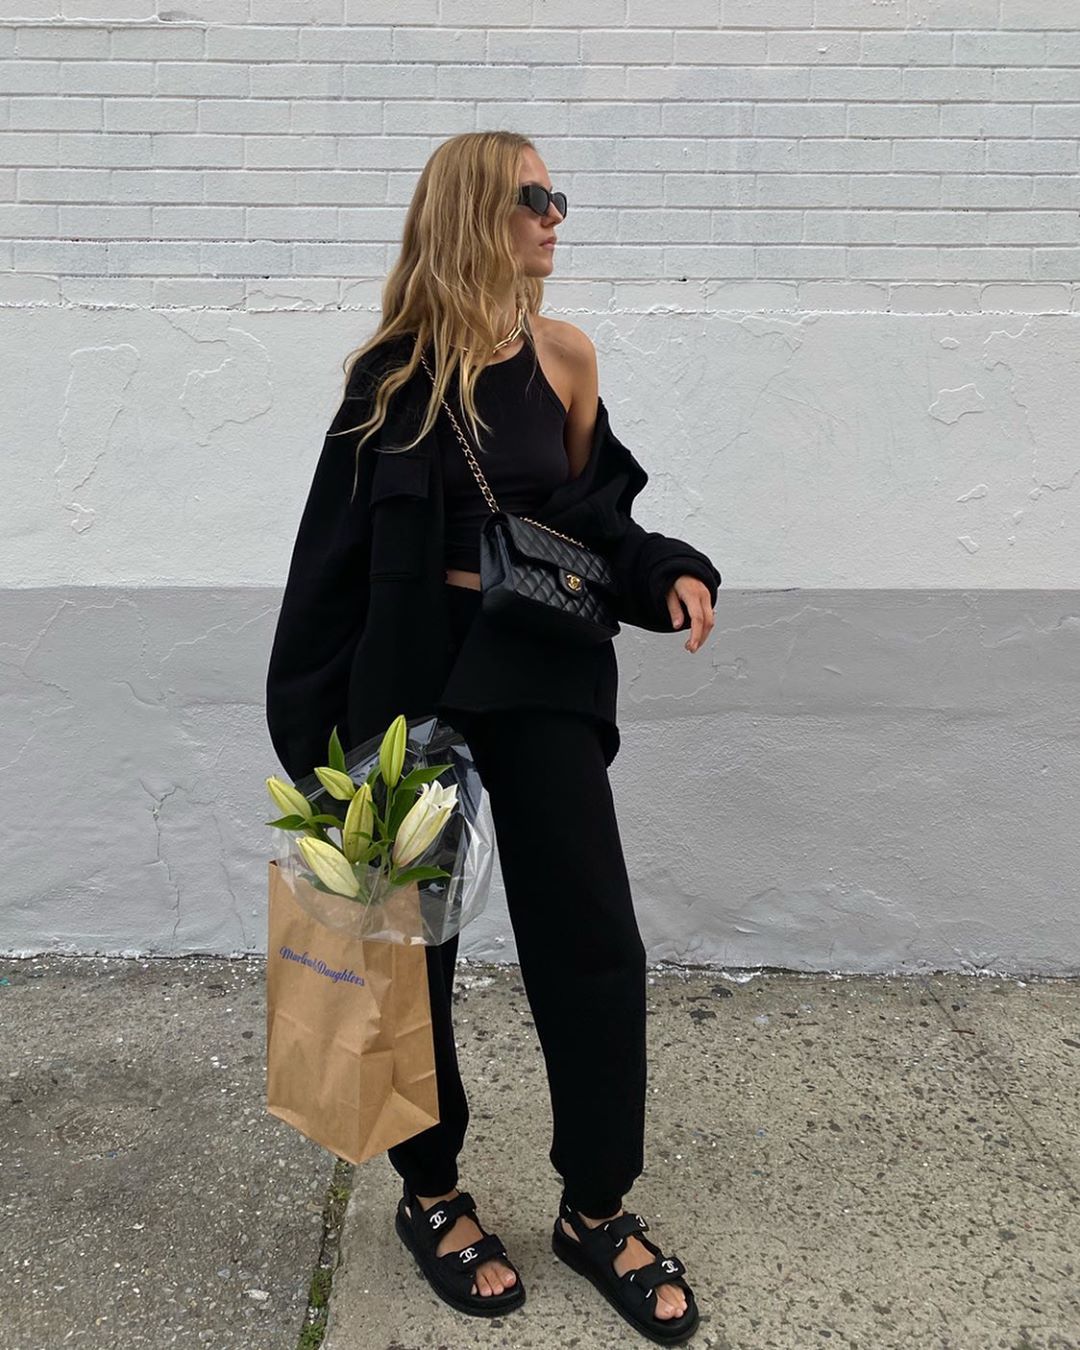 Marie von Behrens @mvb Instagram all-black outfit idea for spring: sweatshirt, tank top, Chanel bag, sweatpants, and Chanel dad sandals